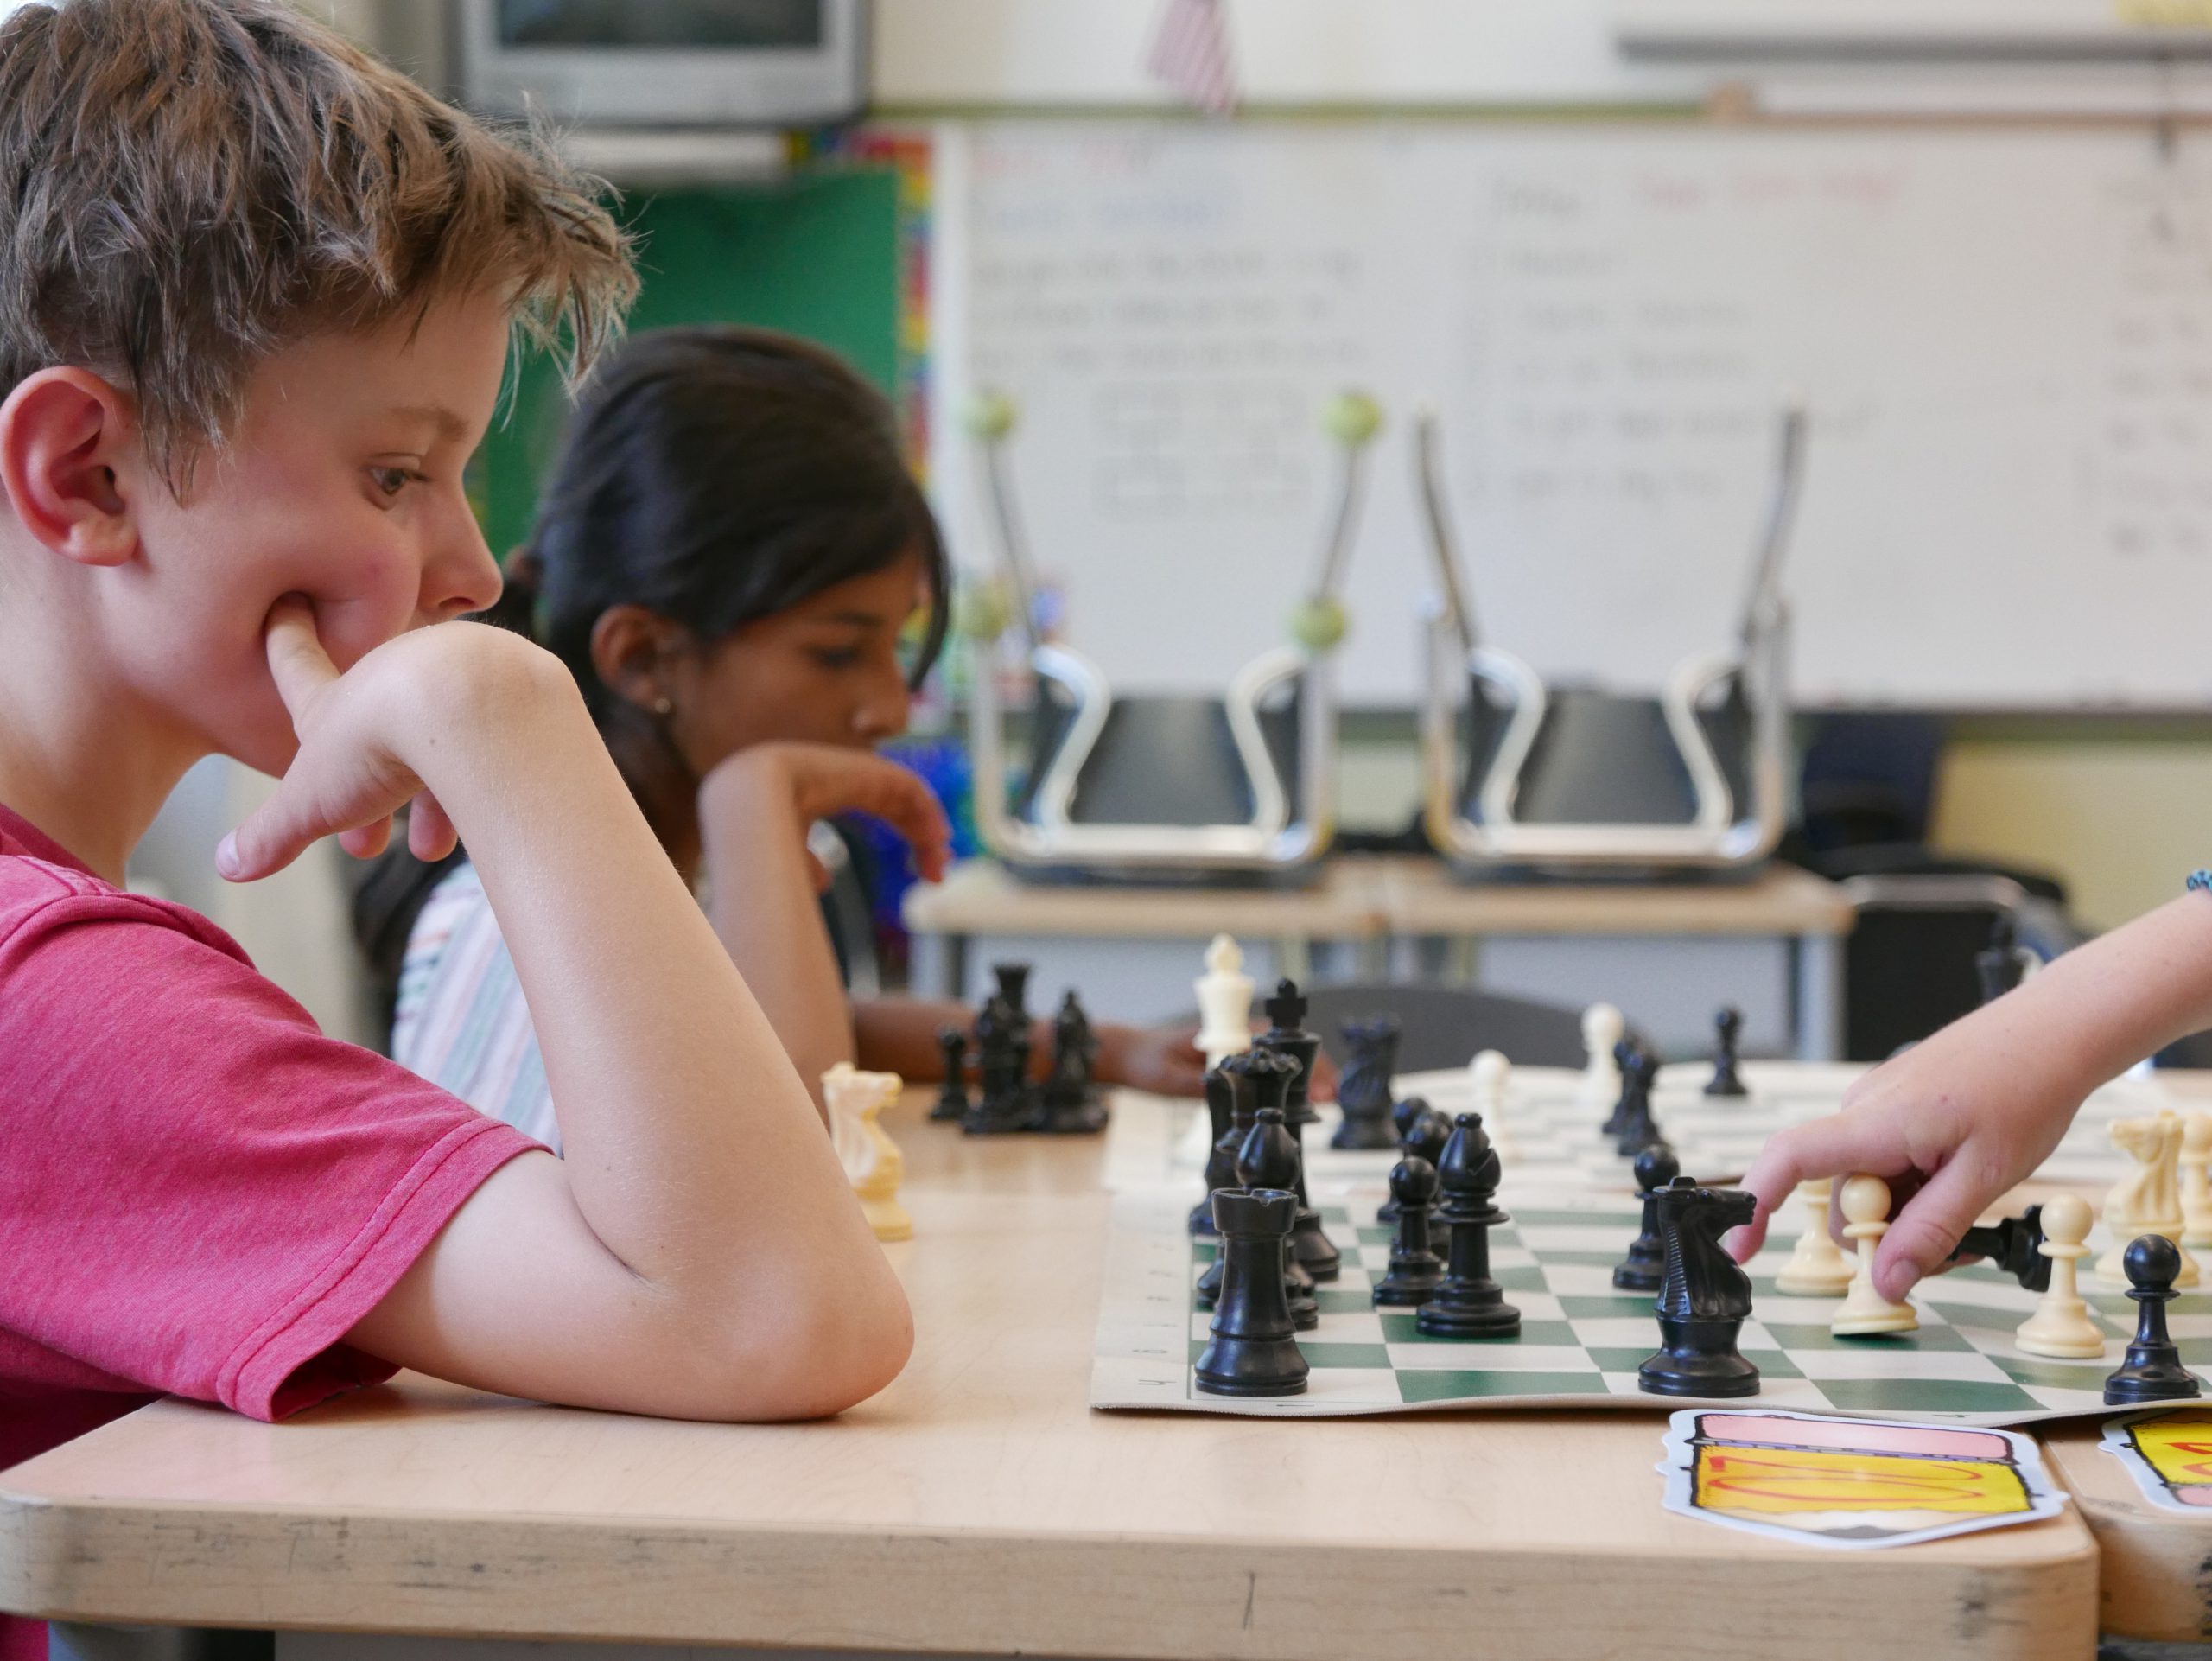 Photograph of Learn to Play Chess during class